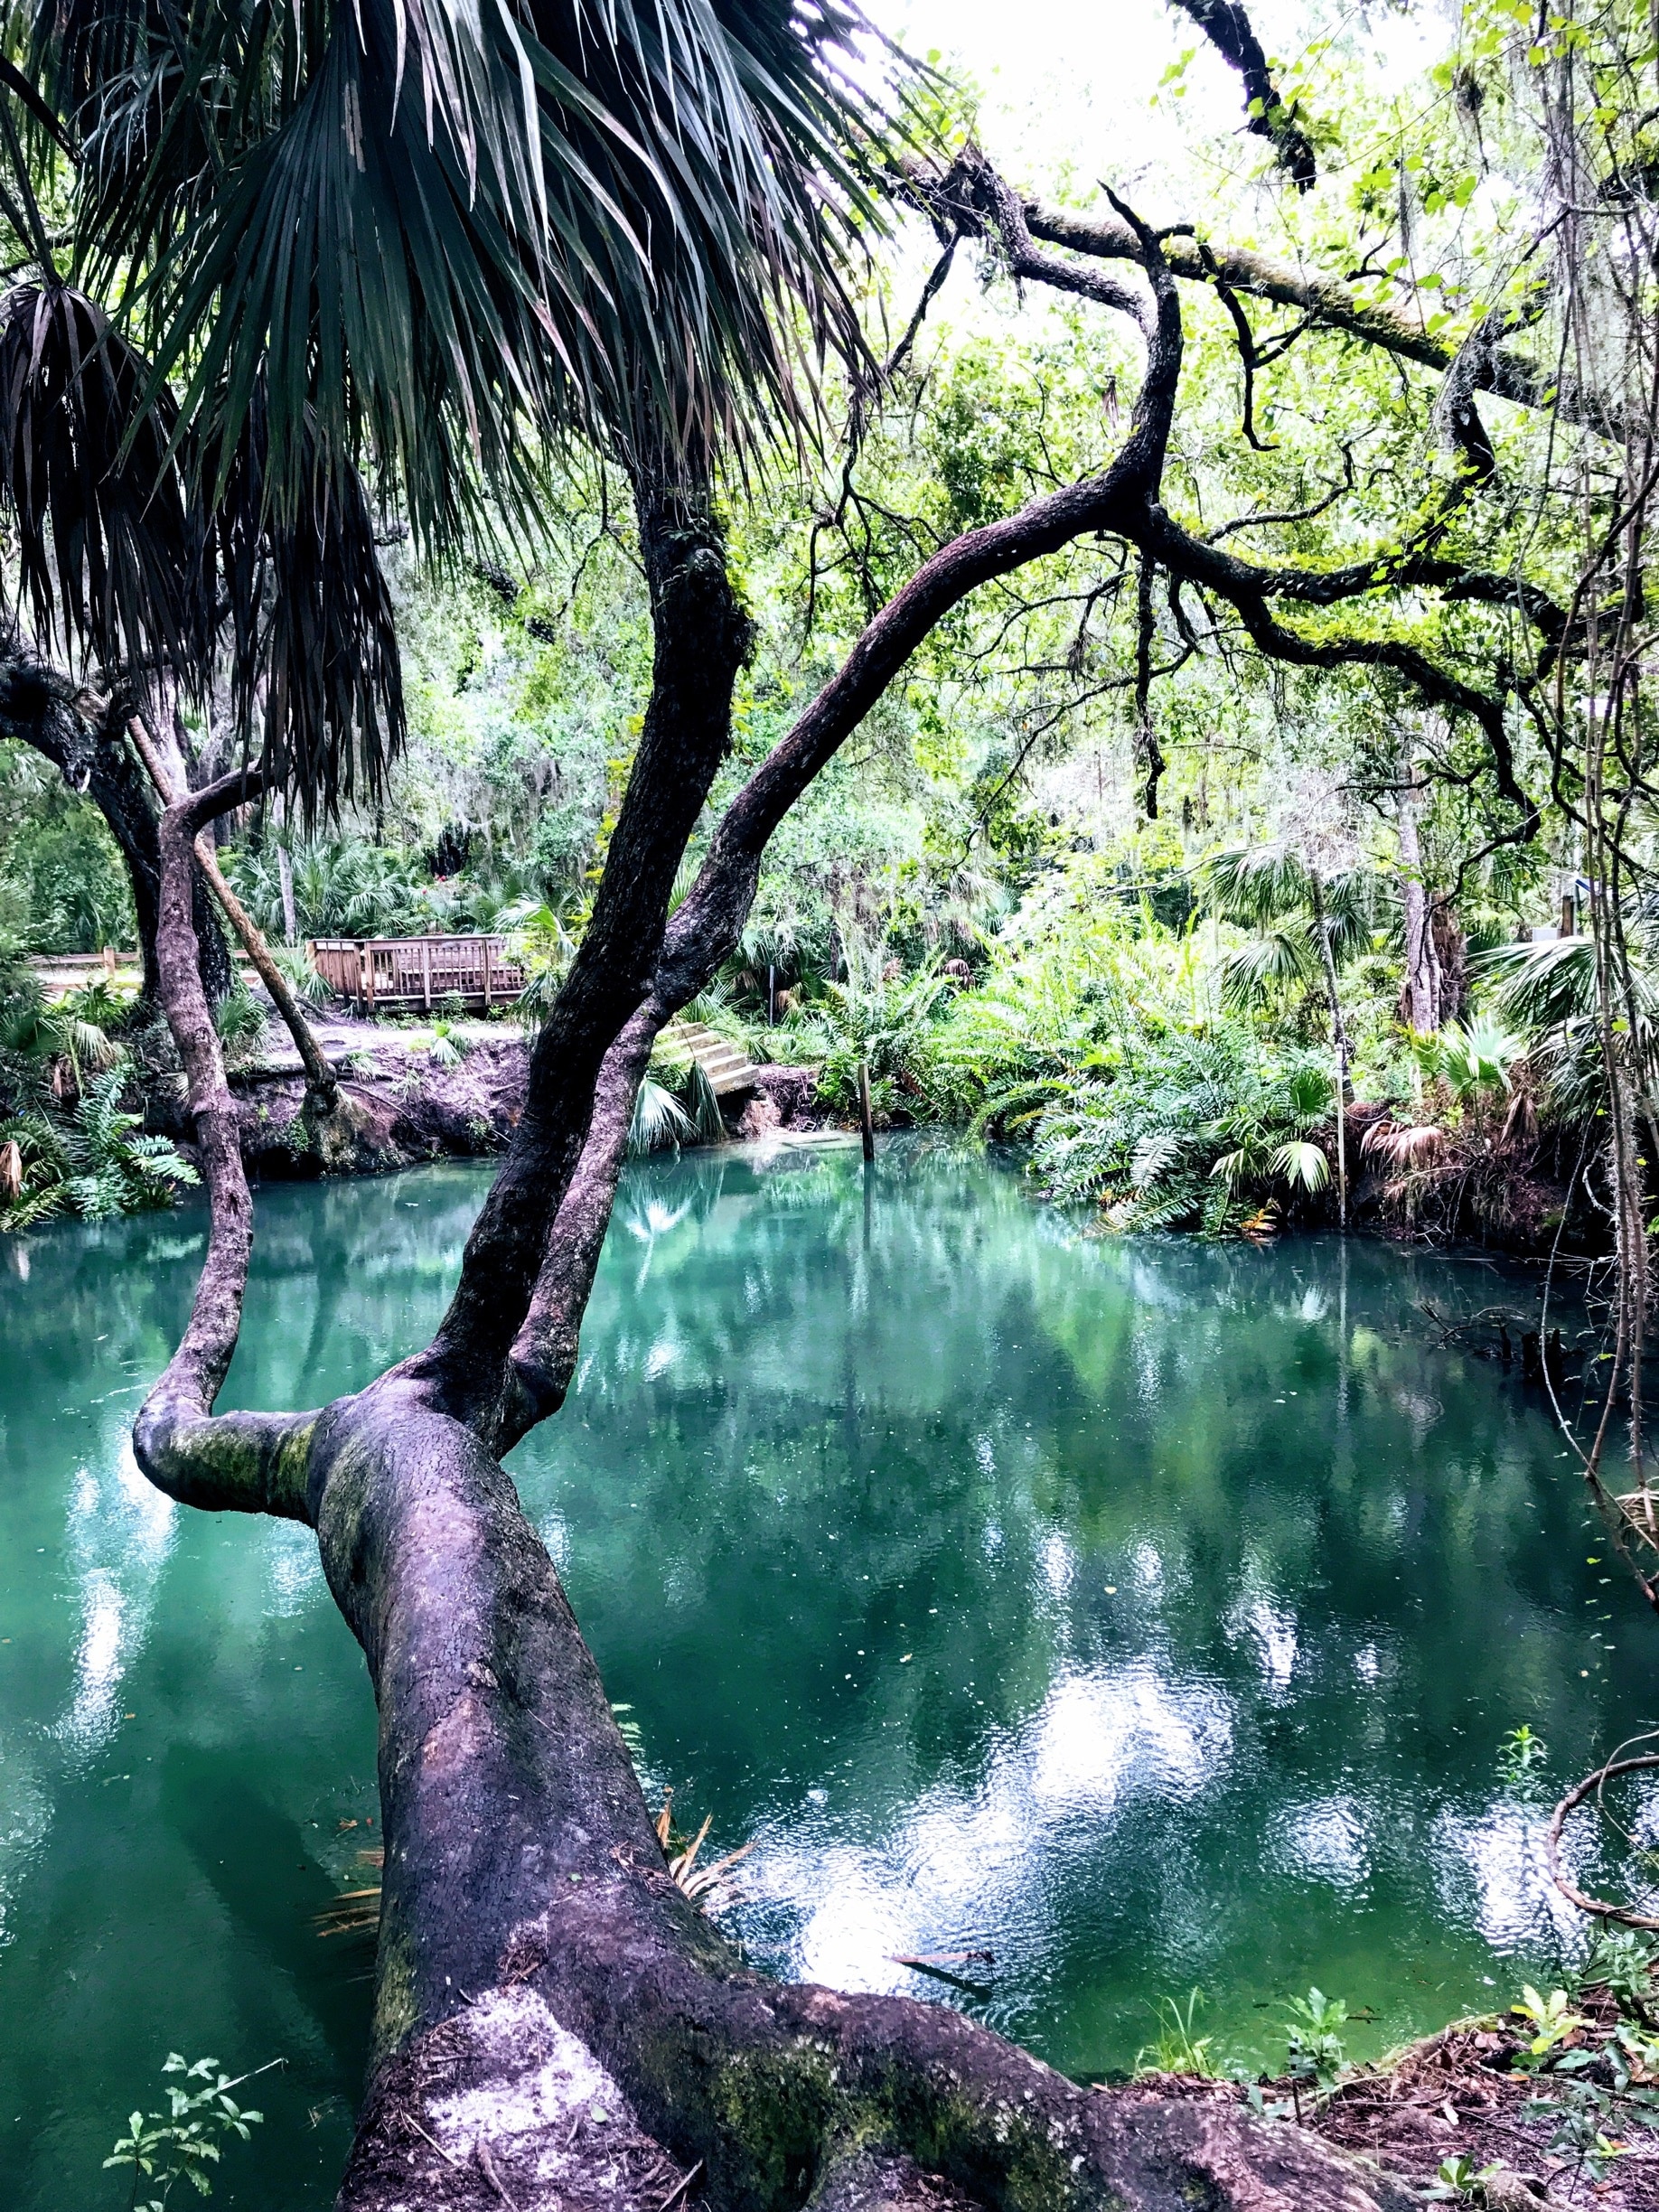 People spend thousands of dollars to visit theme parks but this natural beauty Green Springs is the real deal.  Back in the early 1900’s tourists came to visit this spring and swim. The sulphuric water was believed to have medicinal healing powers.  #GreatOutdoors